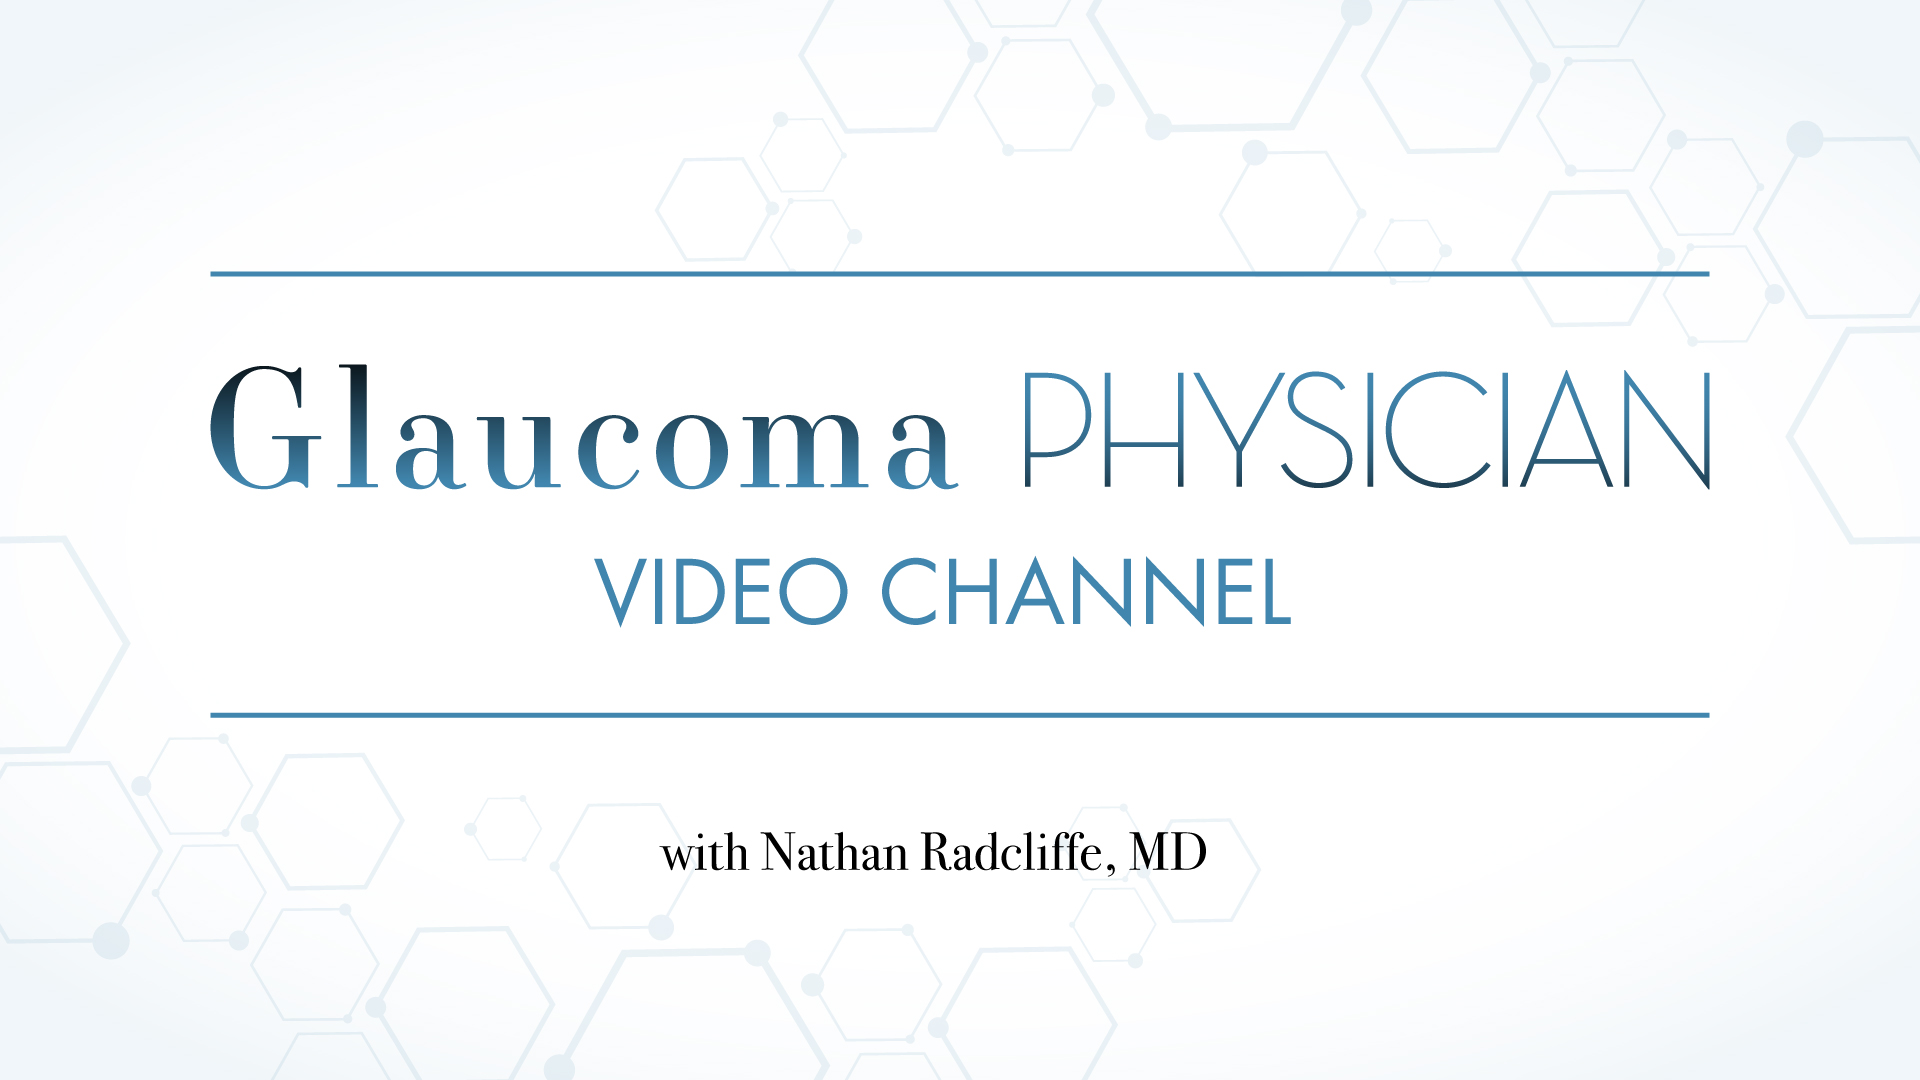 Glaucoma Physician Video Channel